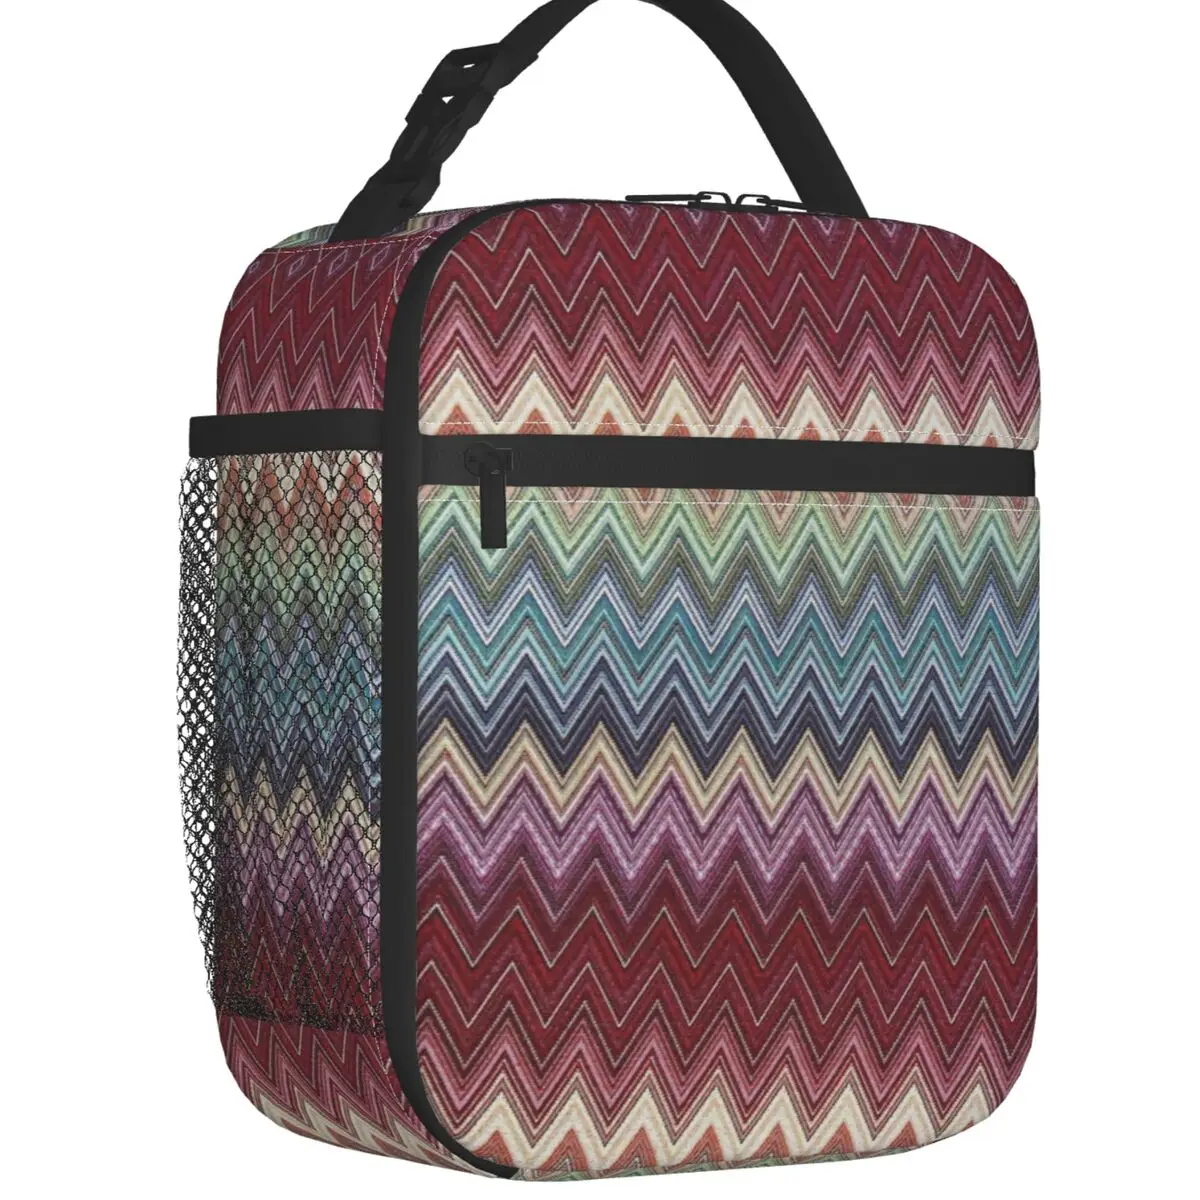 Abstract Geometric Home Zig Zag Thermal Insulated Lunch Bag Boho Camouflage Portable Lunch Tote School Multifunction Food Box